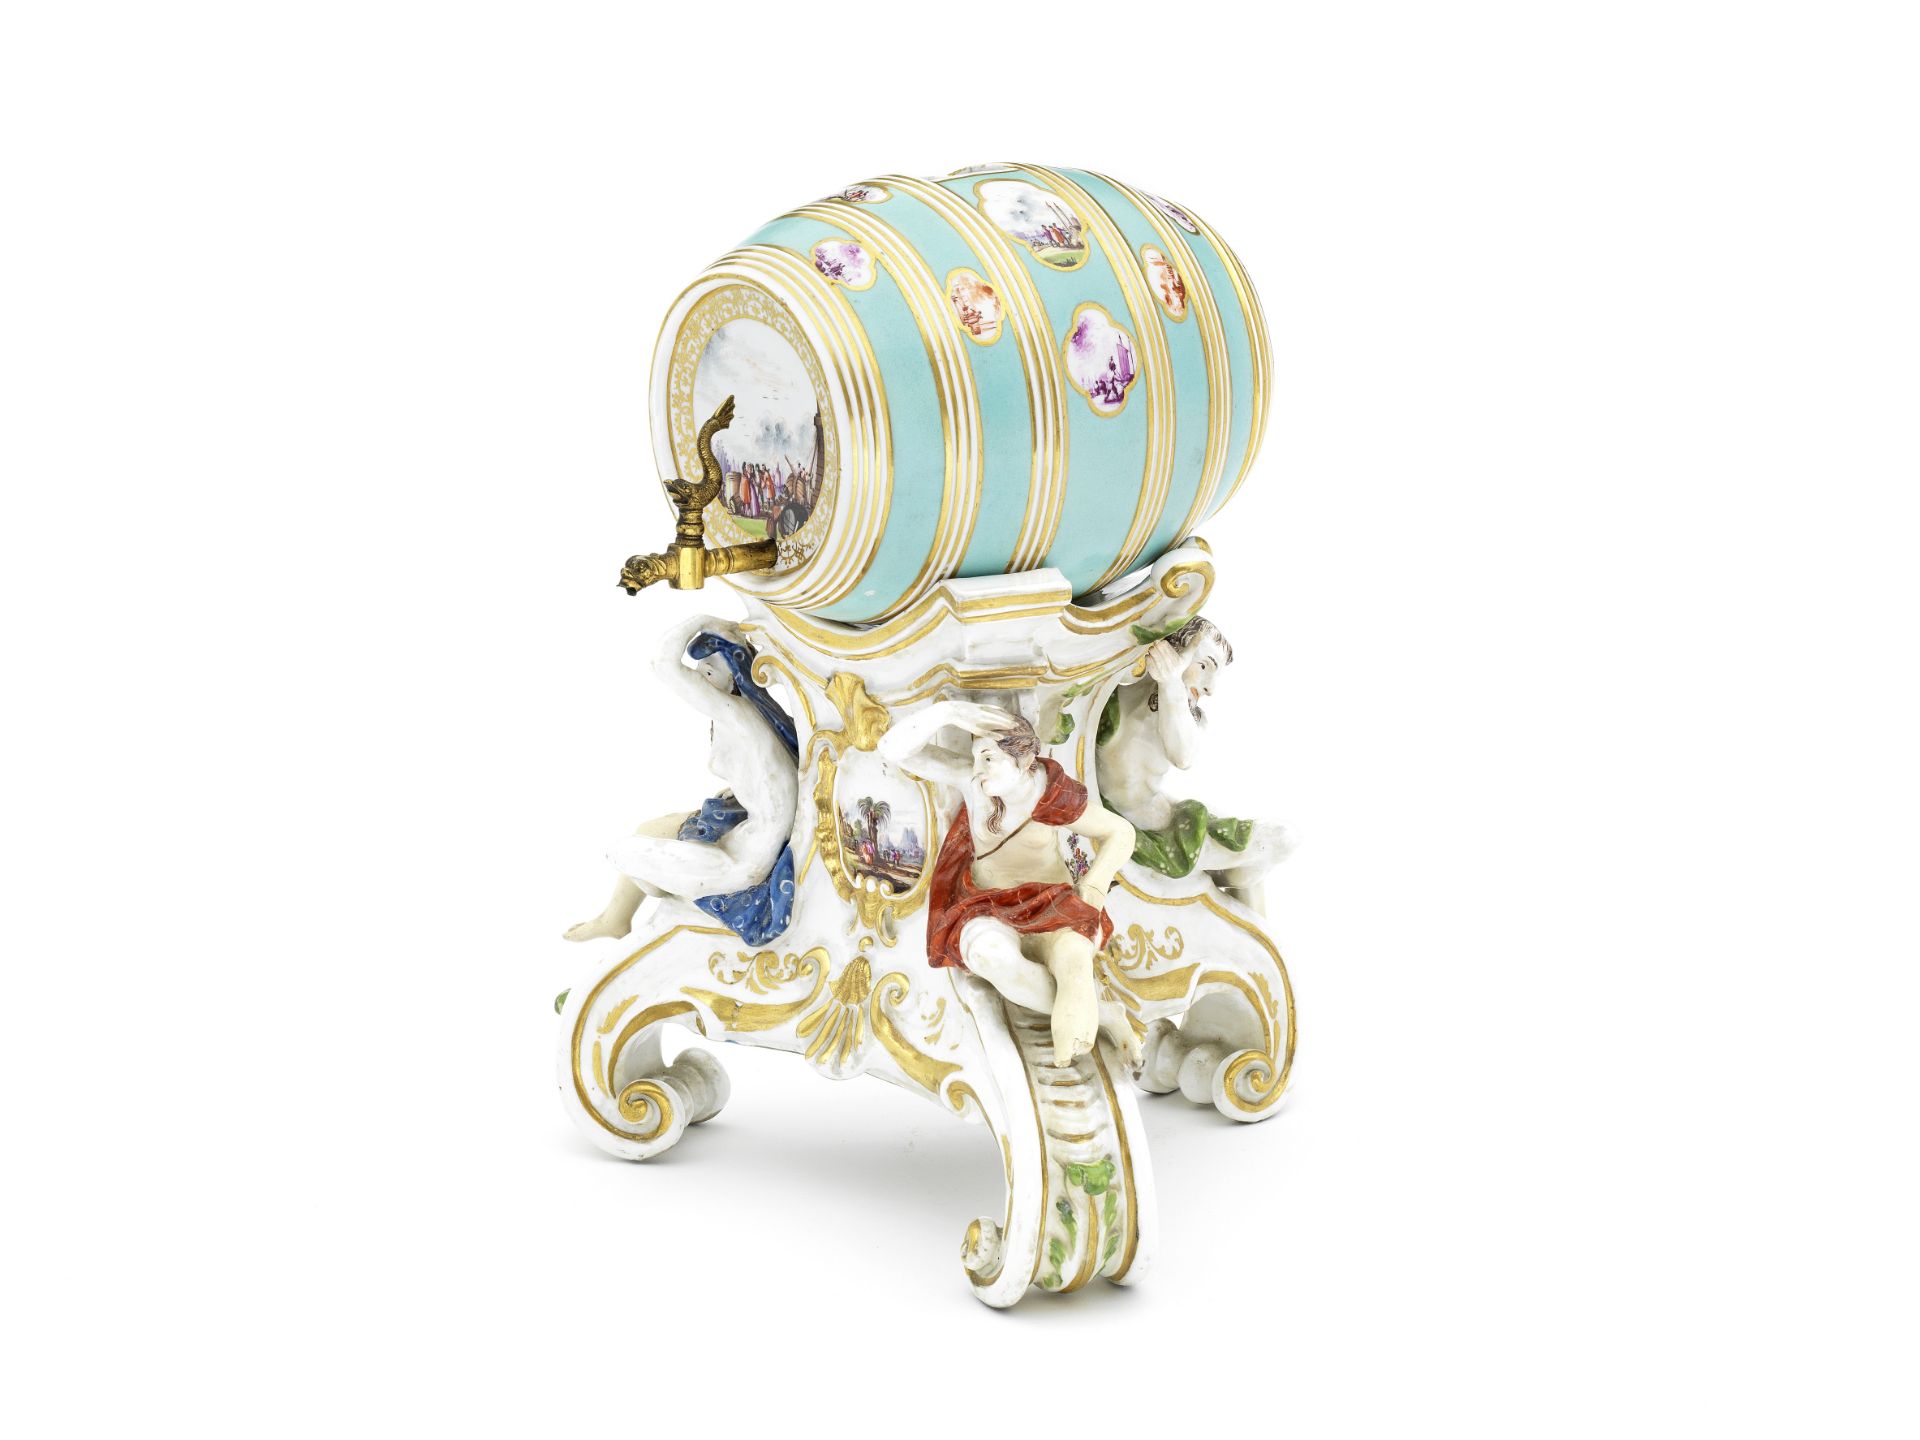 A rare Meissen turquoise-ground barrel on a figural stand, circa 1735-40